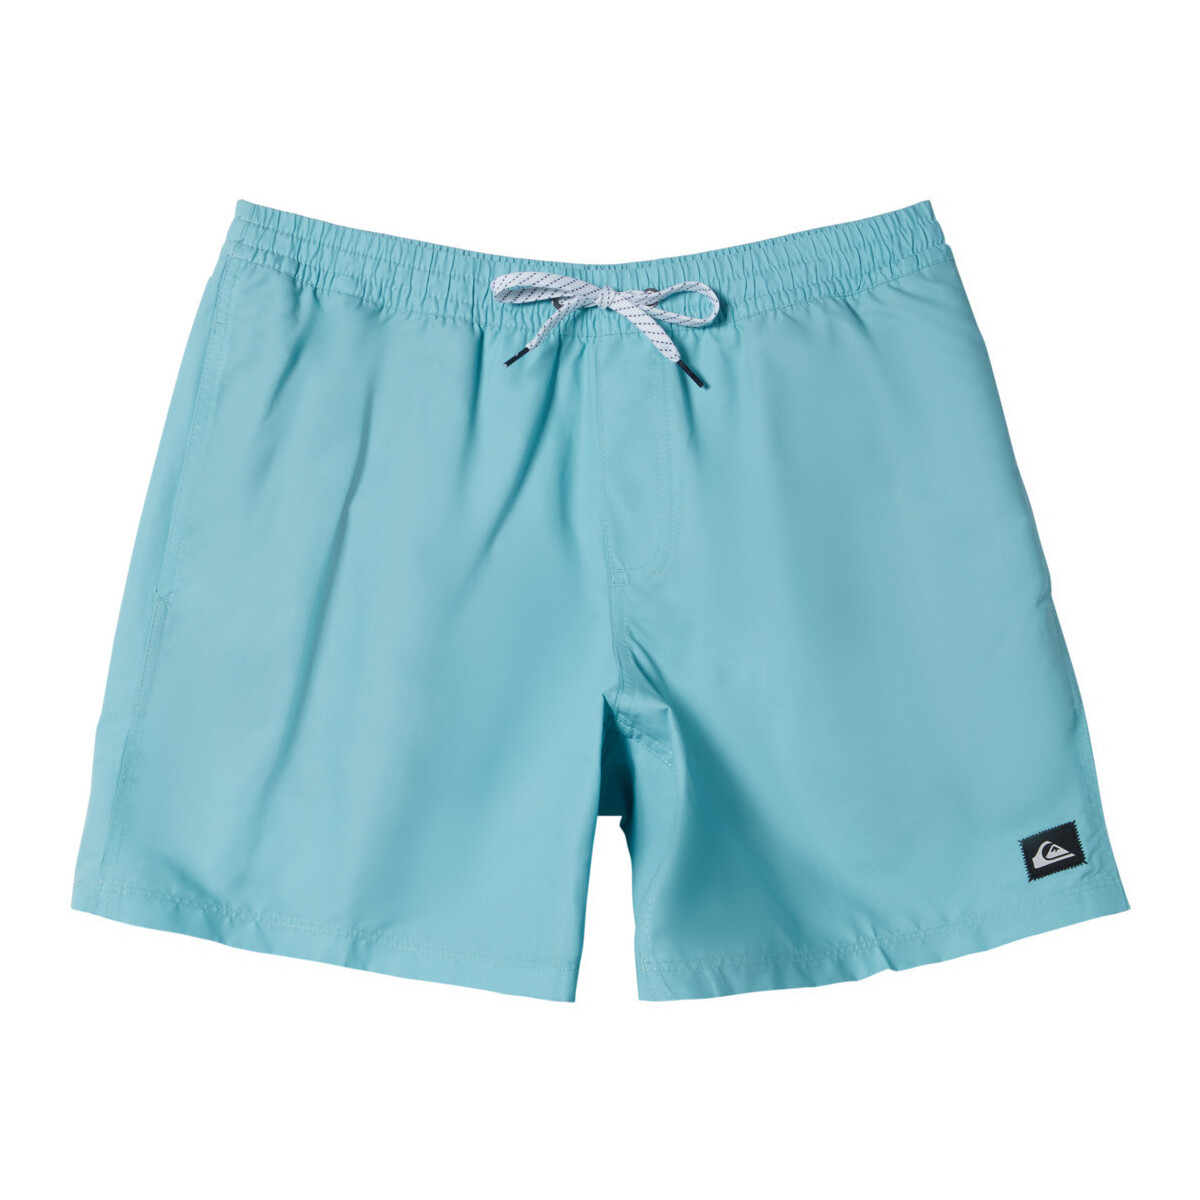 Quiksilver Bleu Everyday Solid Volley y16xDSAy